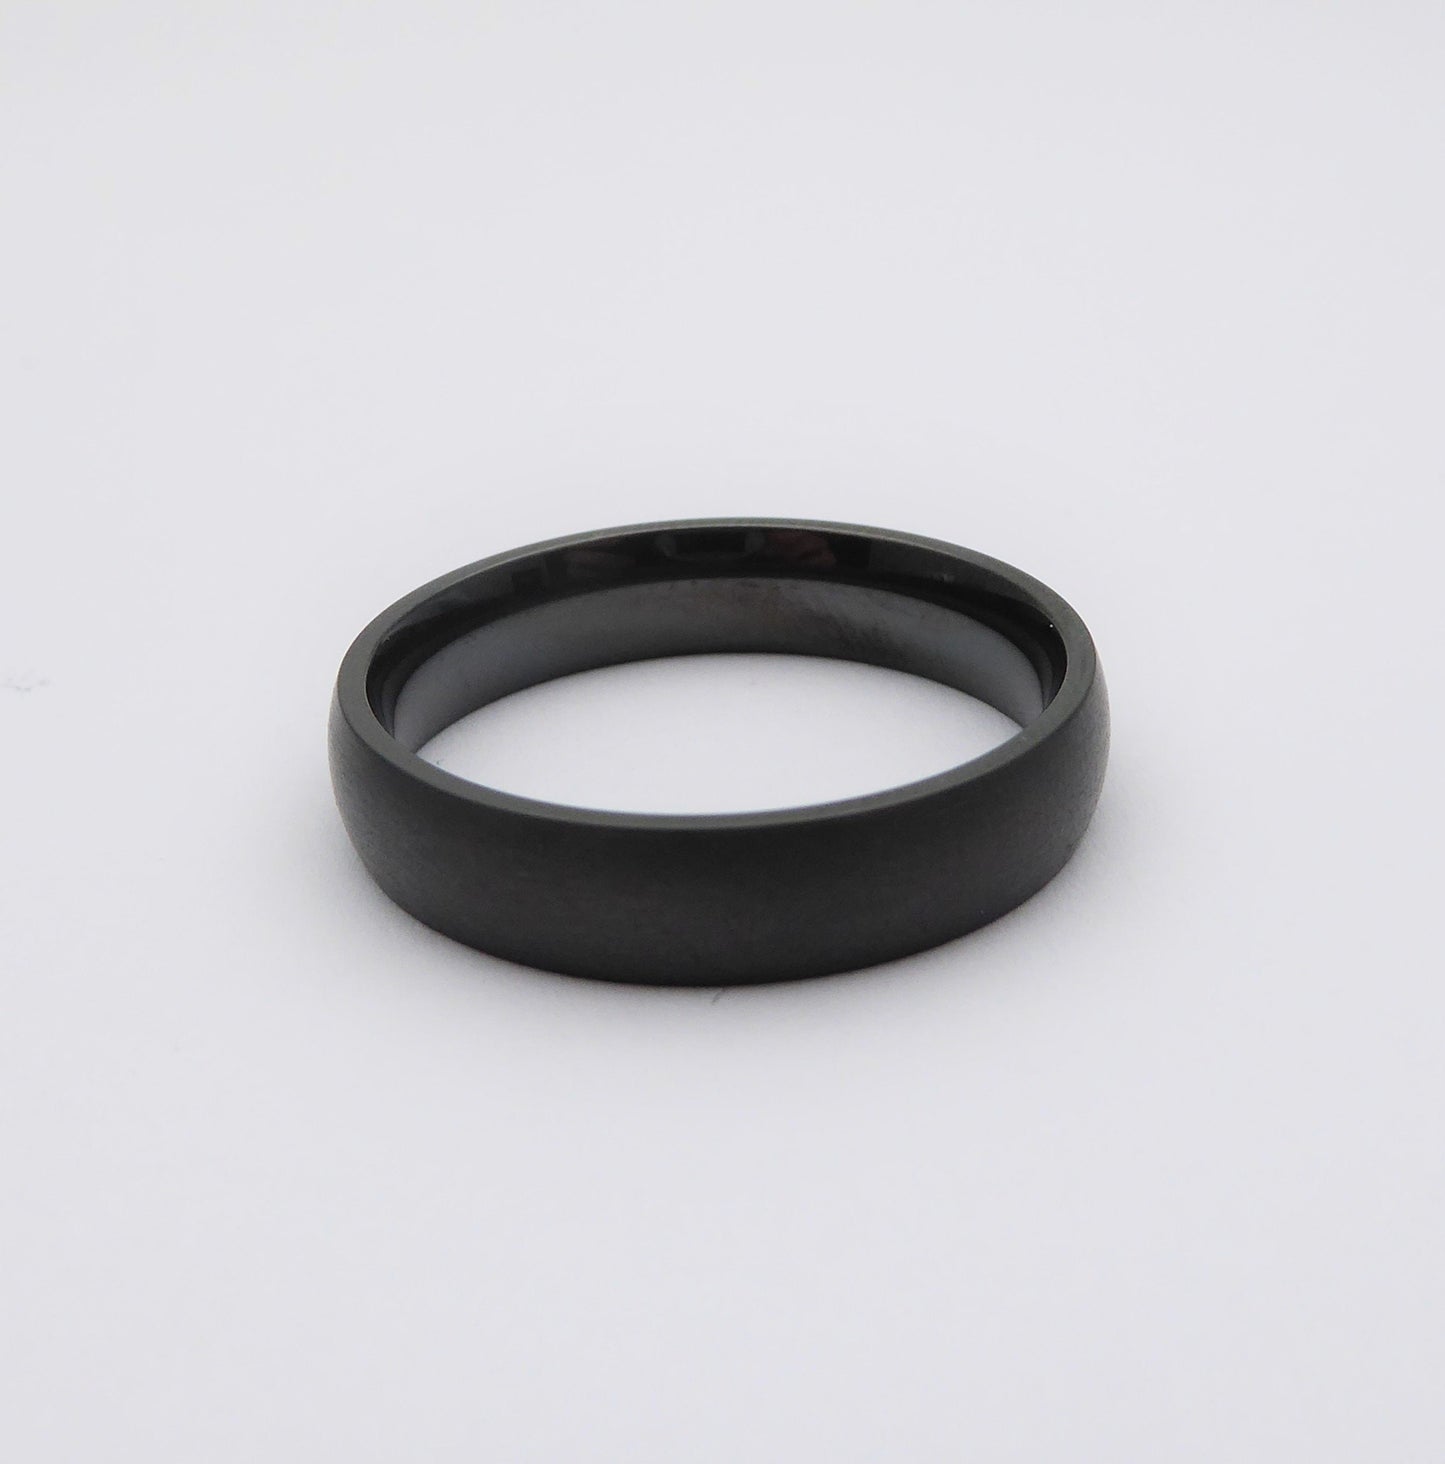 6mm Black Zirconium with matte brushed finish - wedding ring band for men and women